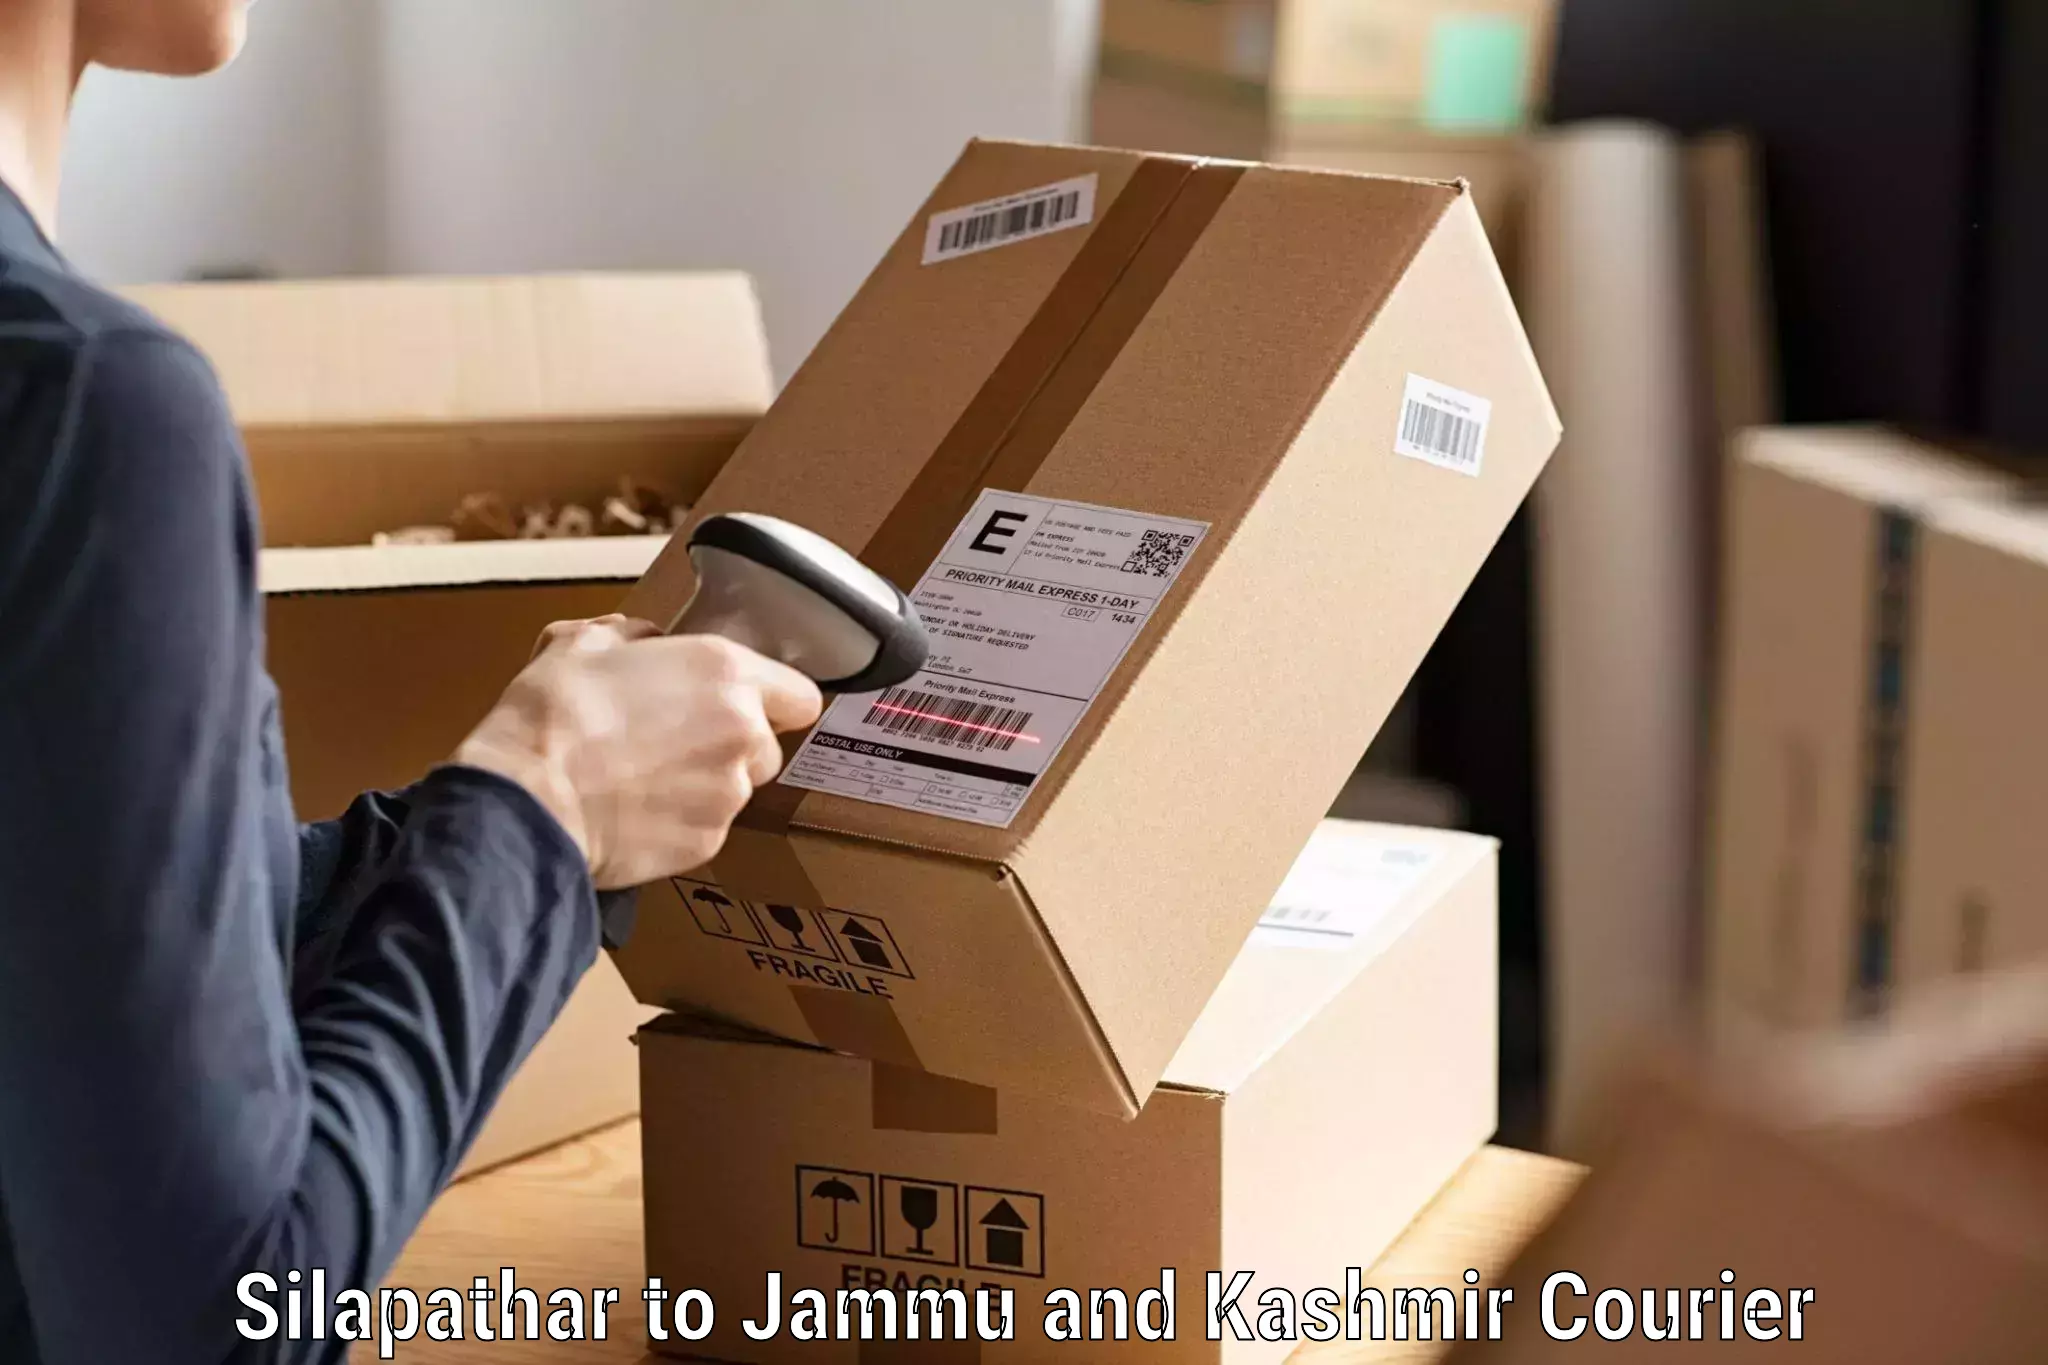 Lightweight parcel options Silapathar to Jammu